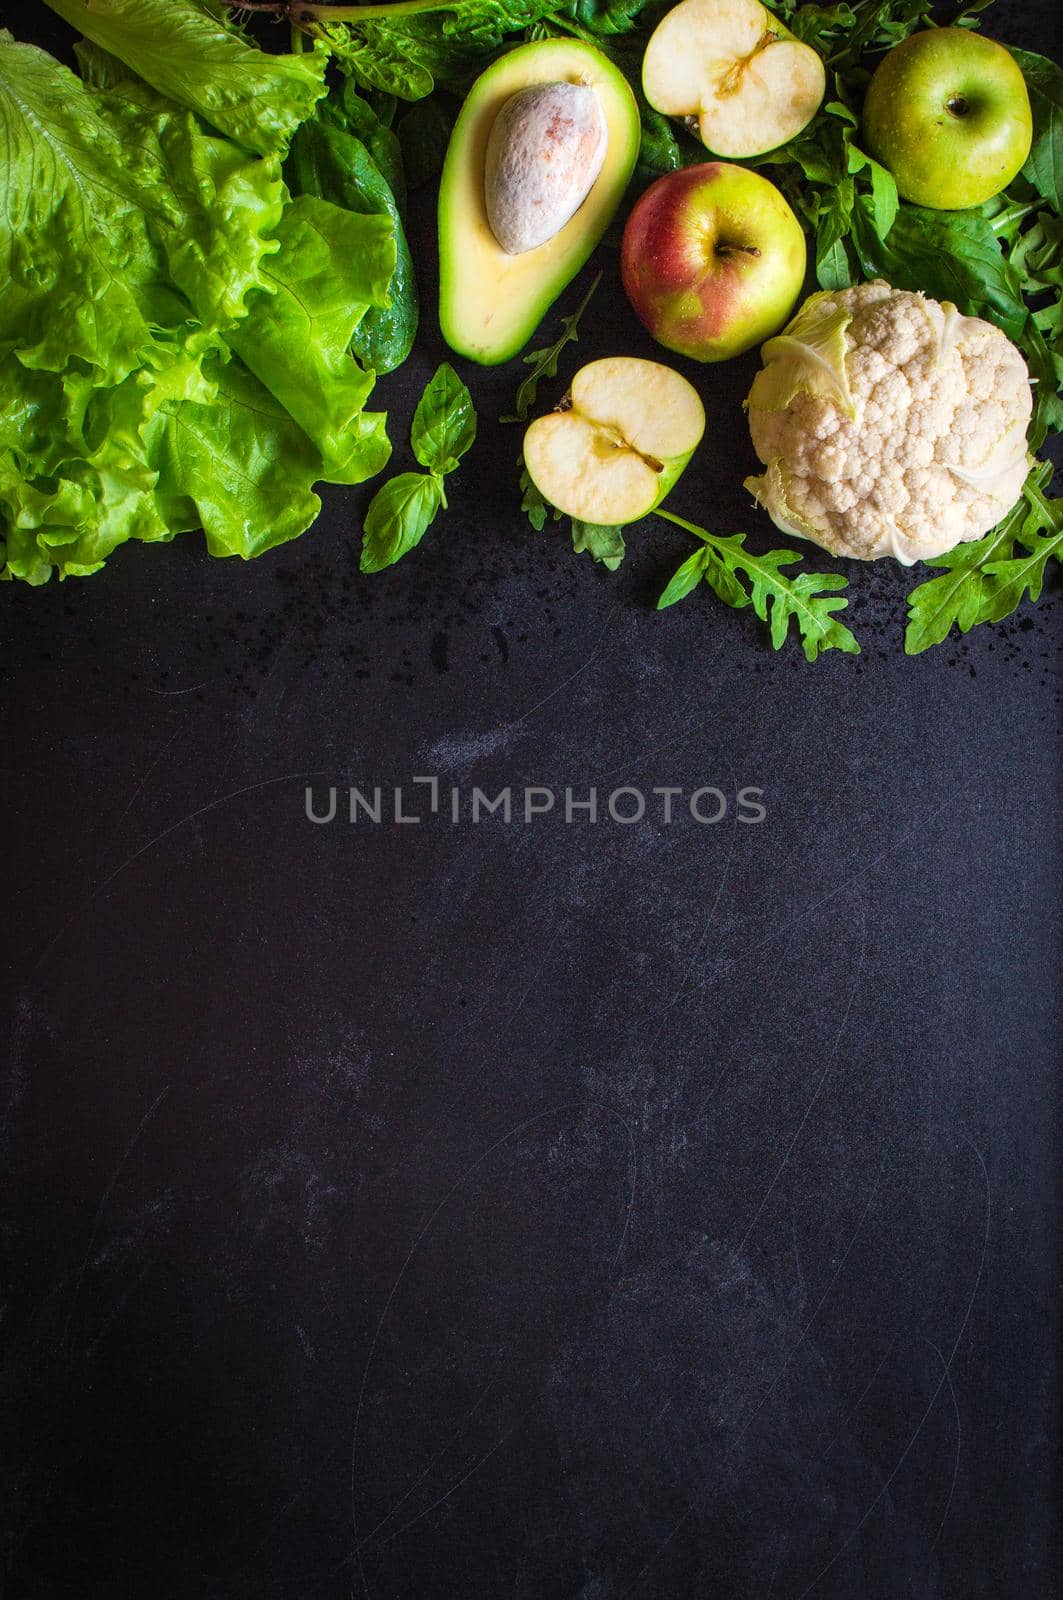 Fresh green vegetables and fruits on black chalk board background. Сauliflower, avocado, spinach, lettuce salad, green apples, herbs. Vegetarian food. Diet/healthy/detox food concept. Space for text